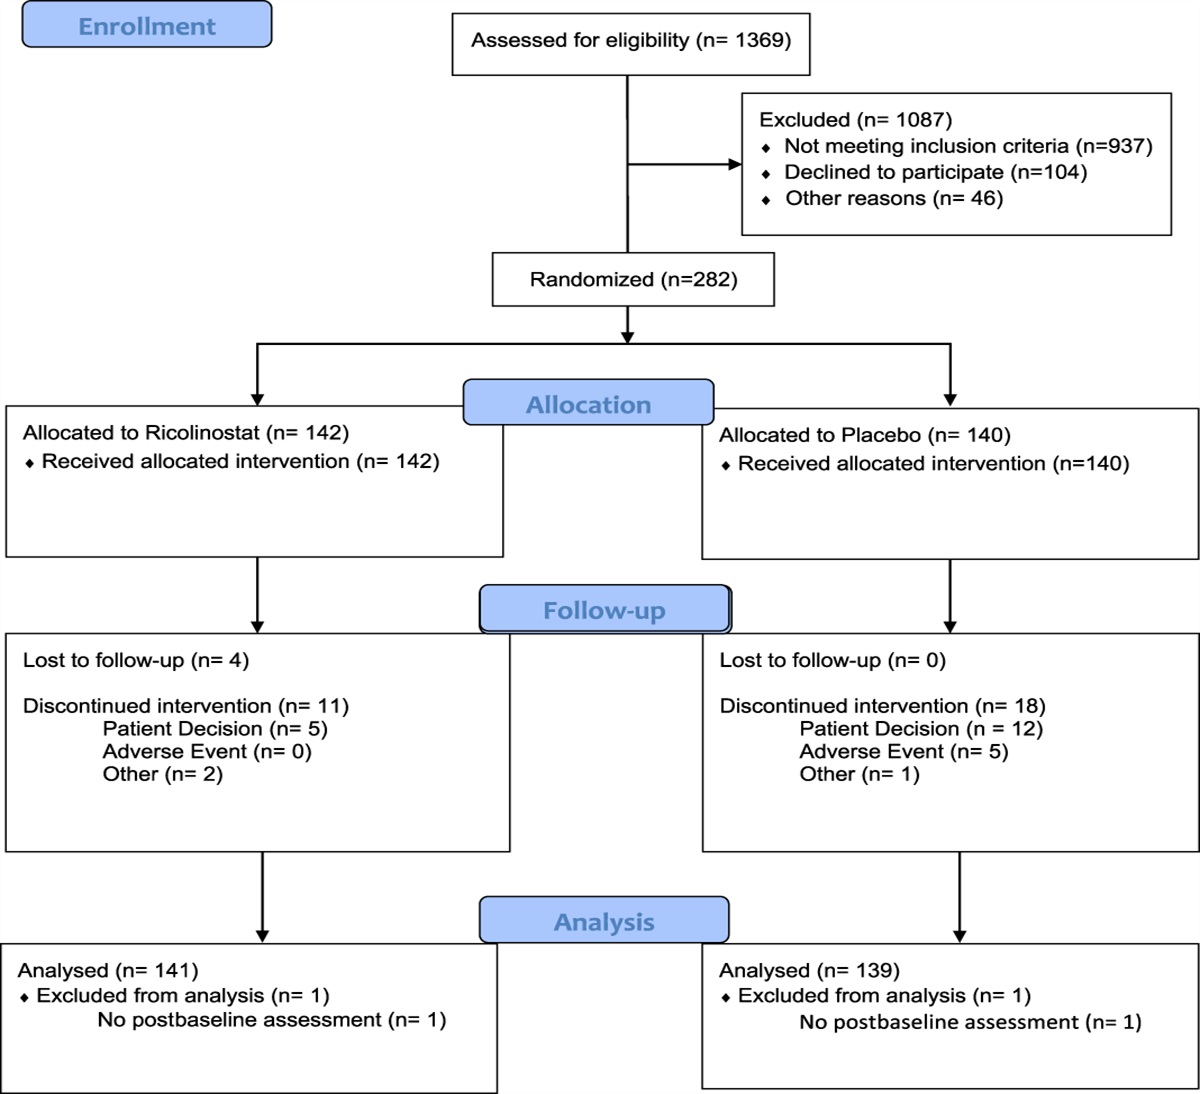 A randomized, double-blind, placebo-controlled study of histone deacetylase type 6 inhibition for the treatment of painful diabetic peripheral neuropathy